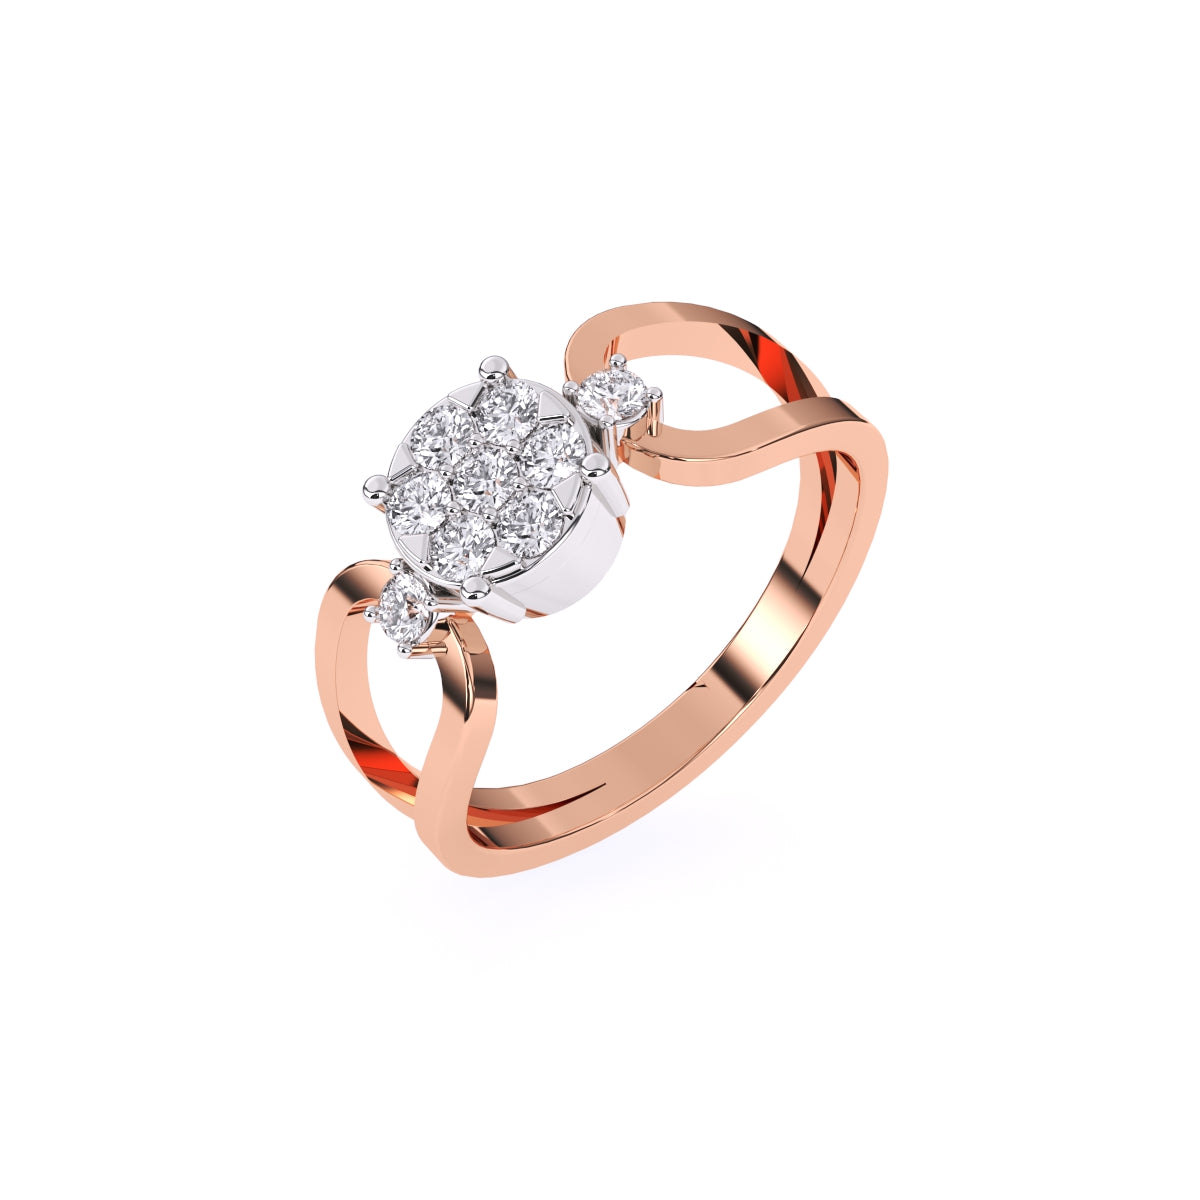 57CT 14KT Rose Gold Diamond Band Ring – Bailey's Fine Jewelry